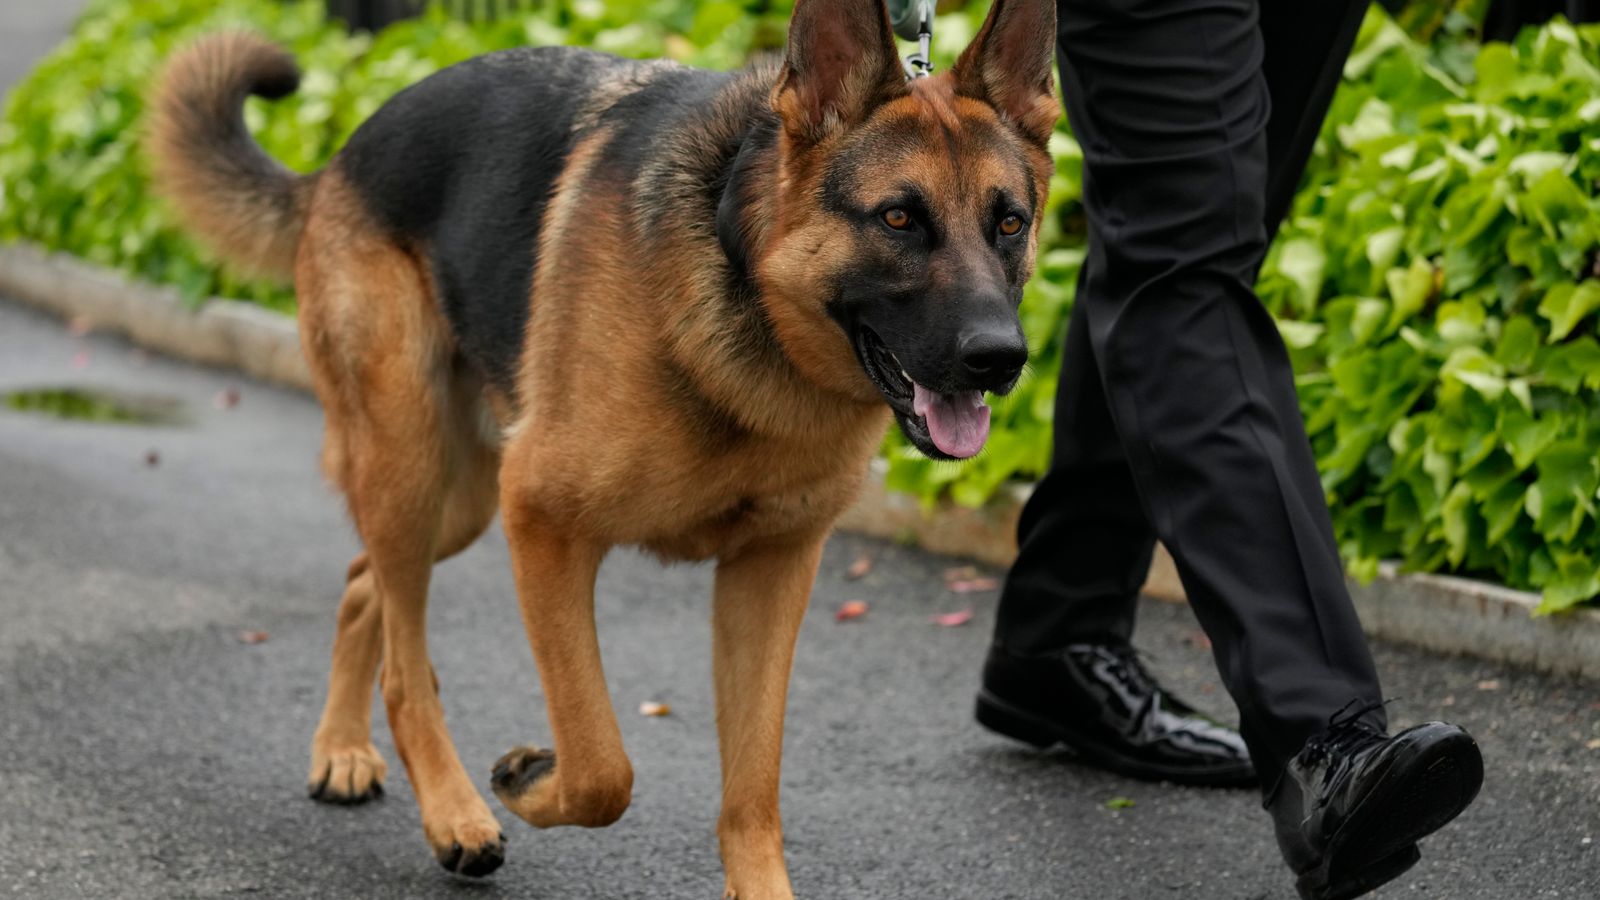 biden's dog 'should be put down', opponent who shot and killed her own dog suggests